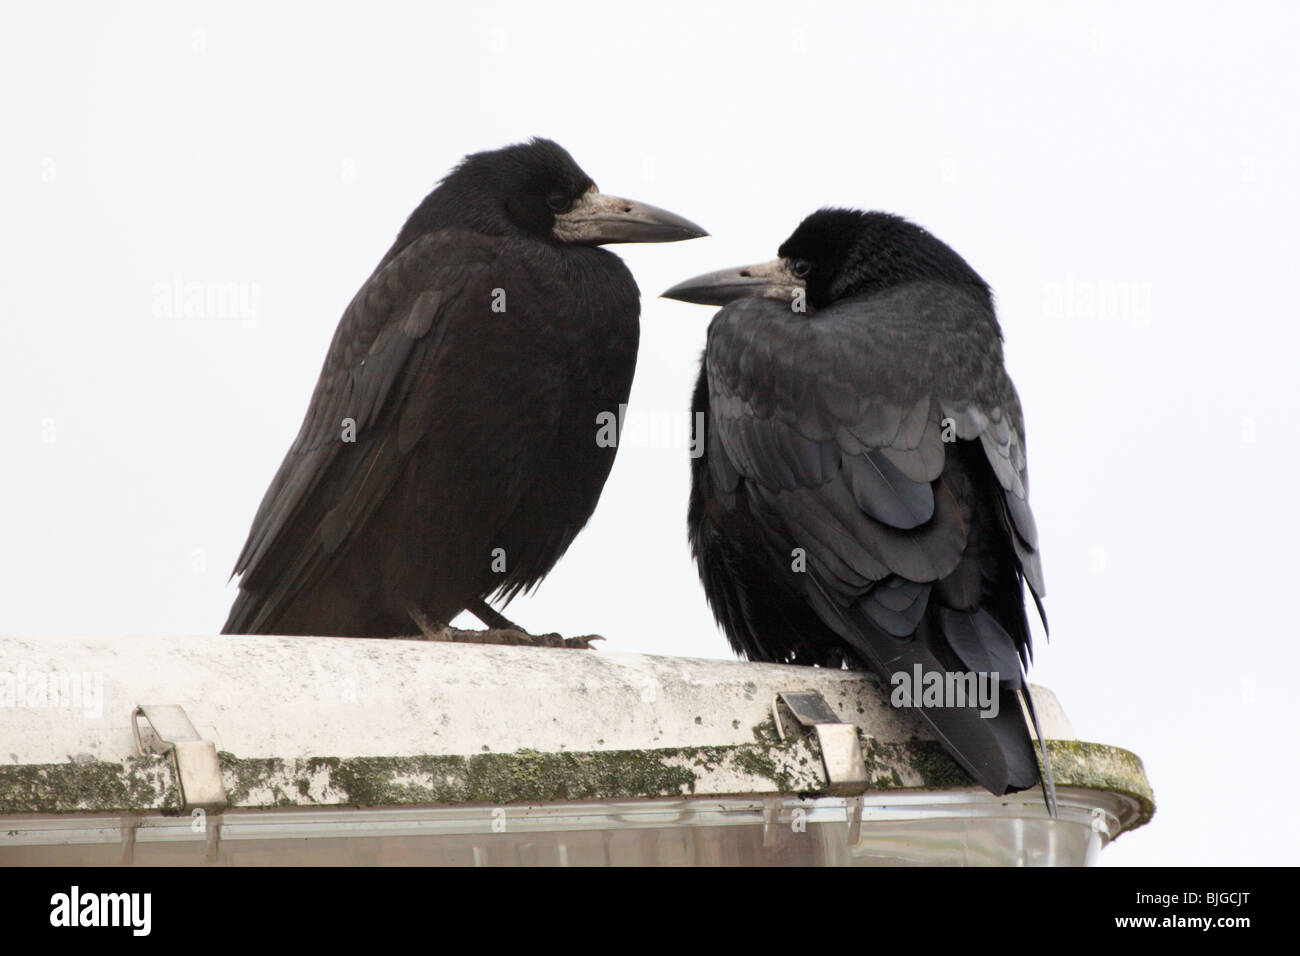 Two Rooks, Corvus frugilegus, perched on a lamppost Stock Photo